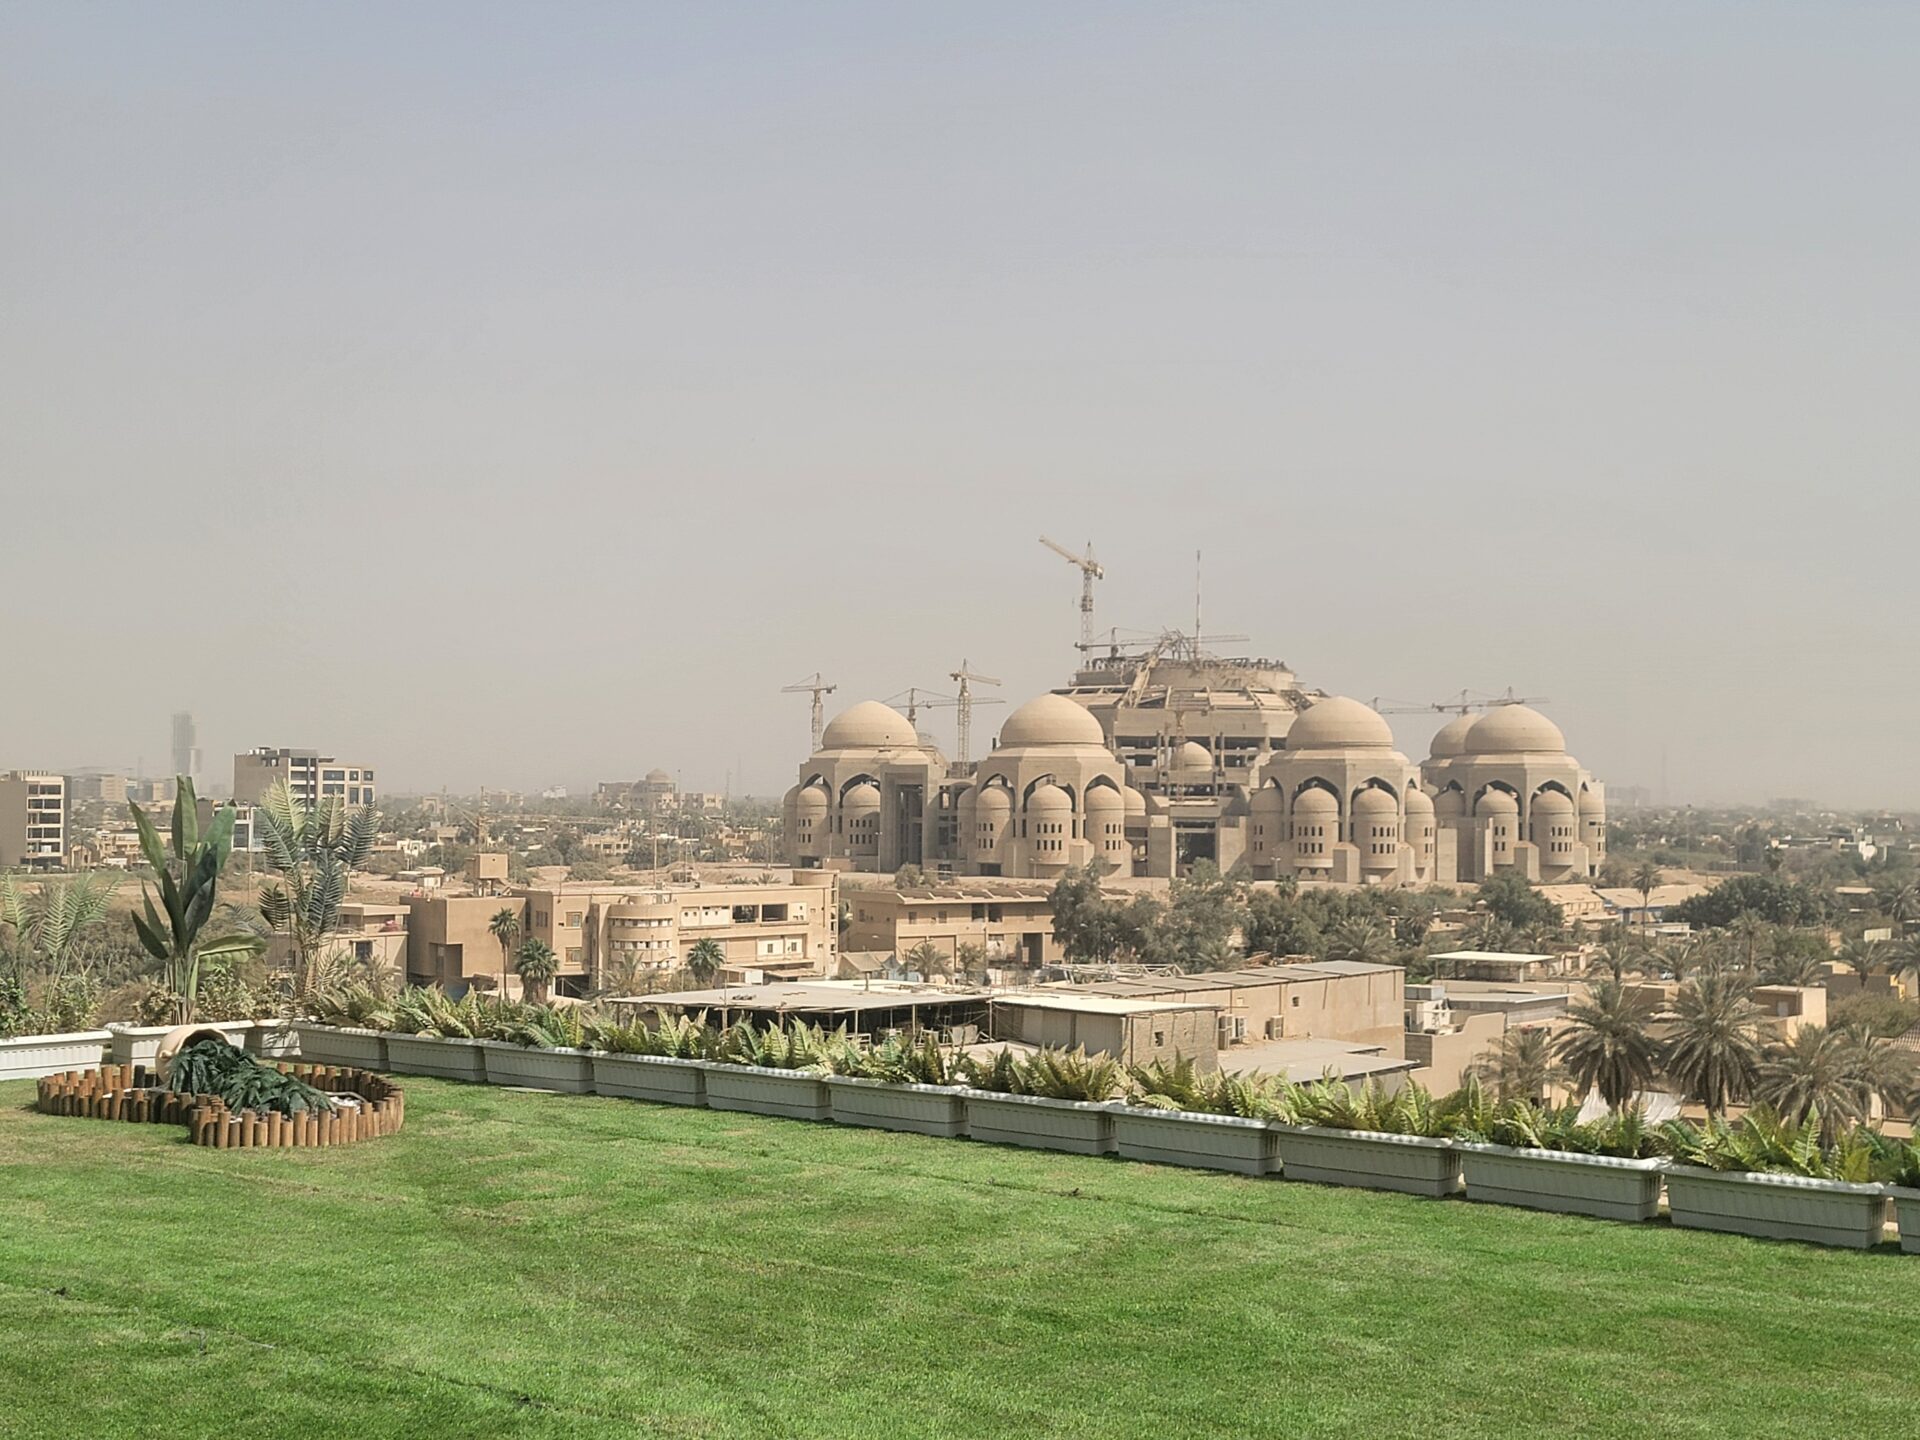 a large building with domes and a green lawn